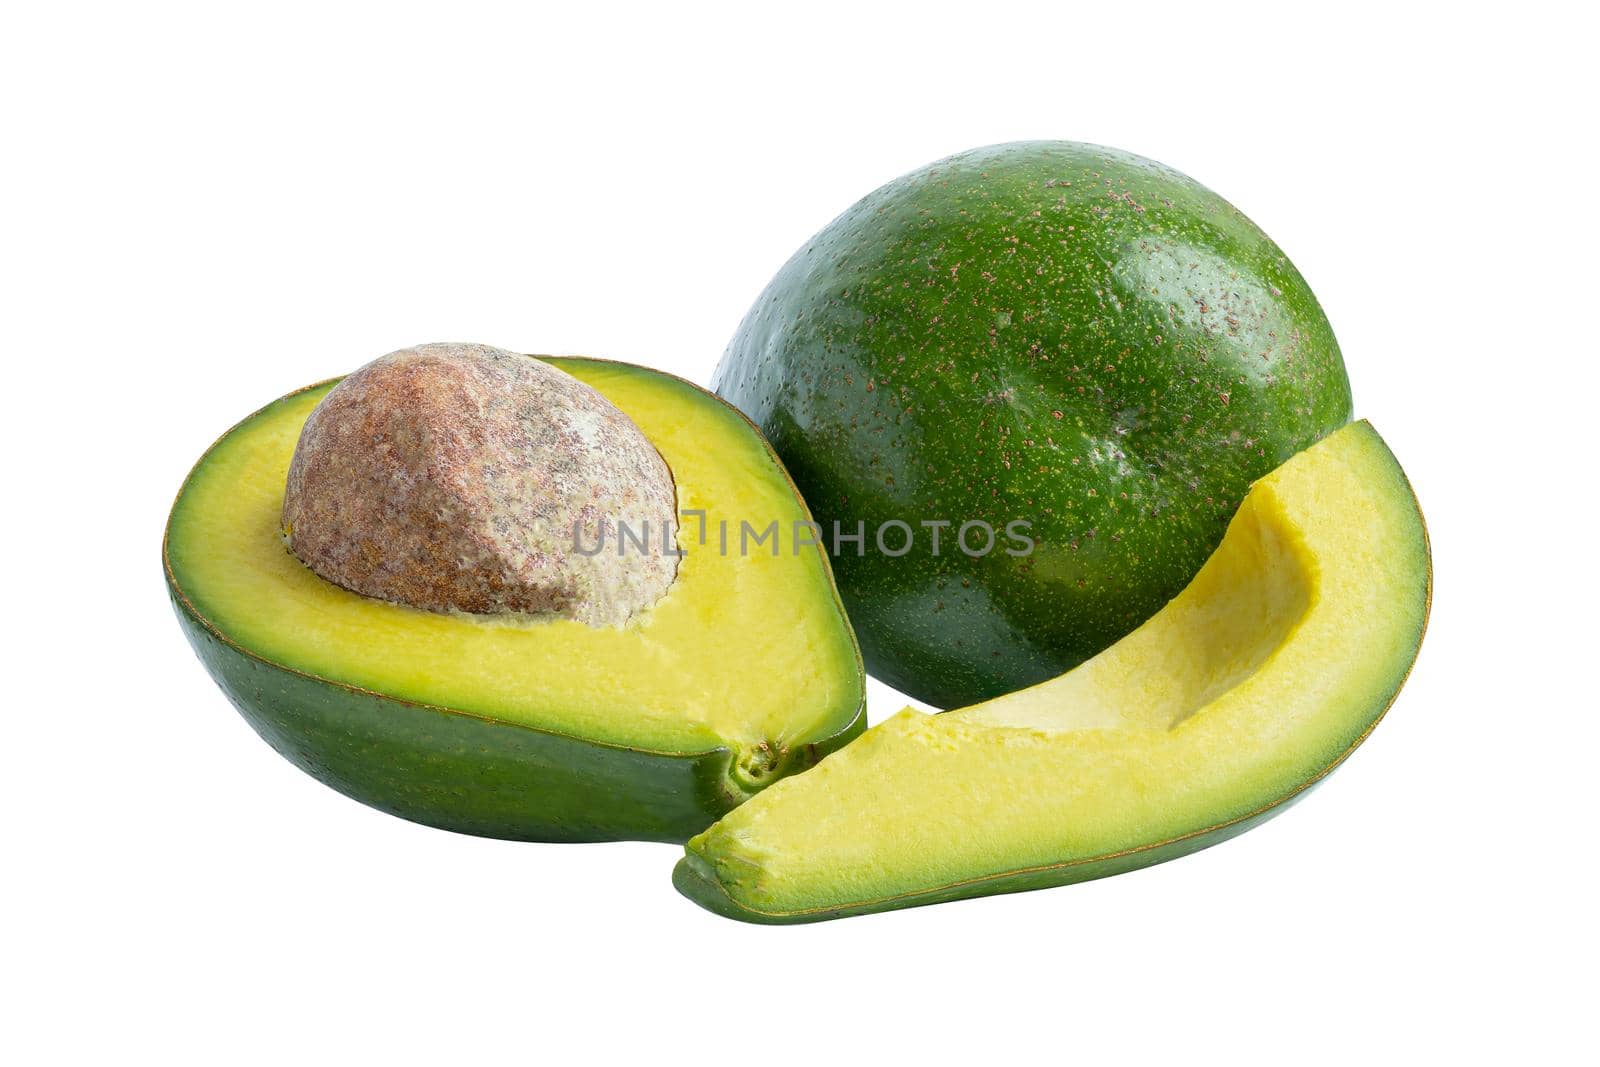 Avocado fruit food whole and half isolated on white background with clipping path.